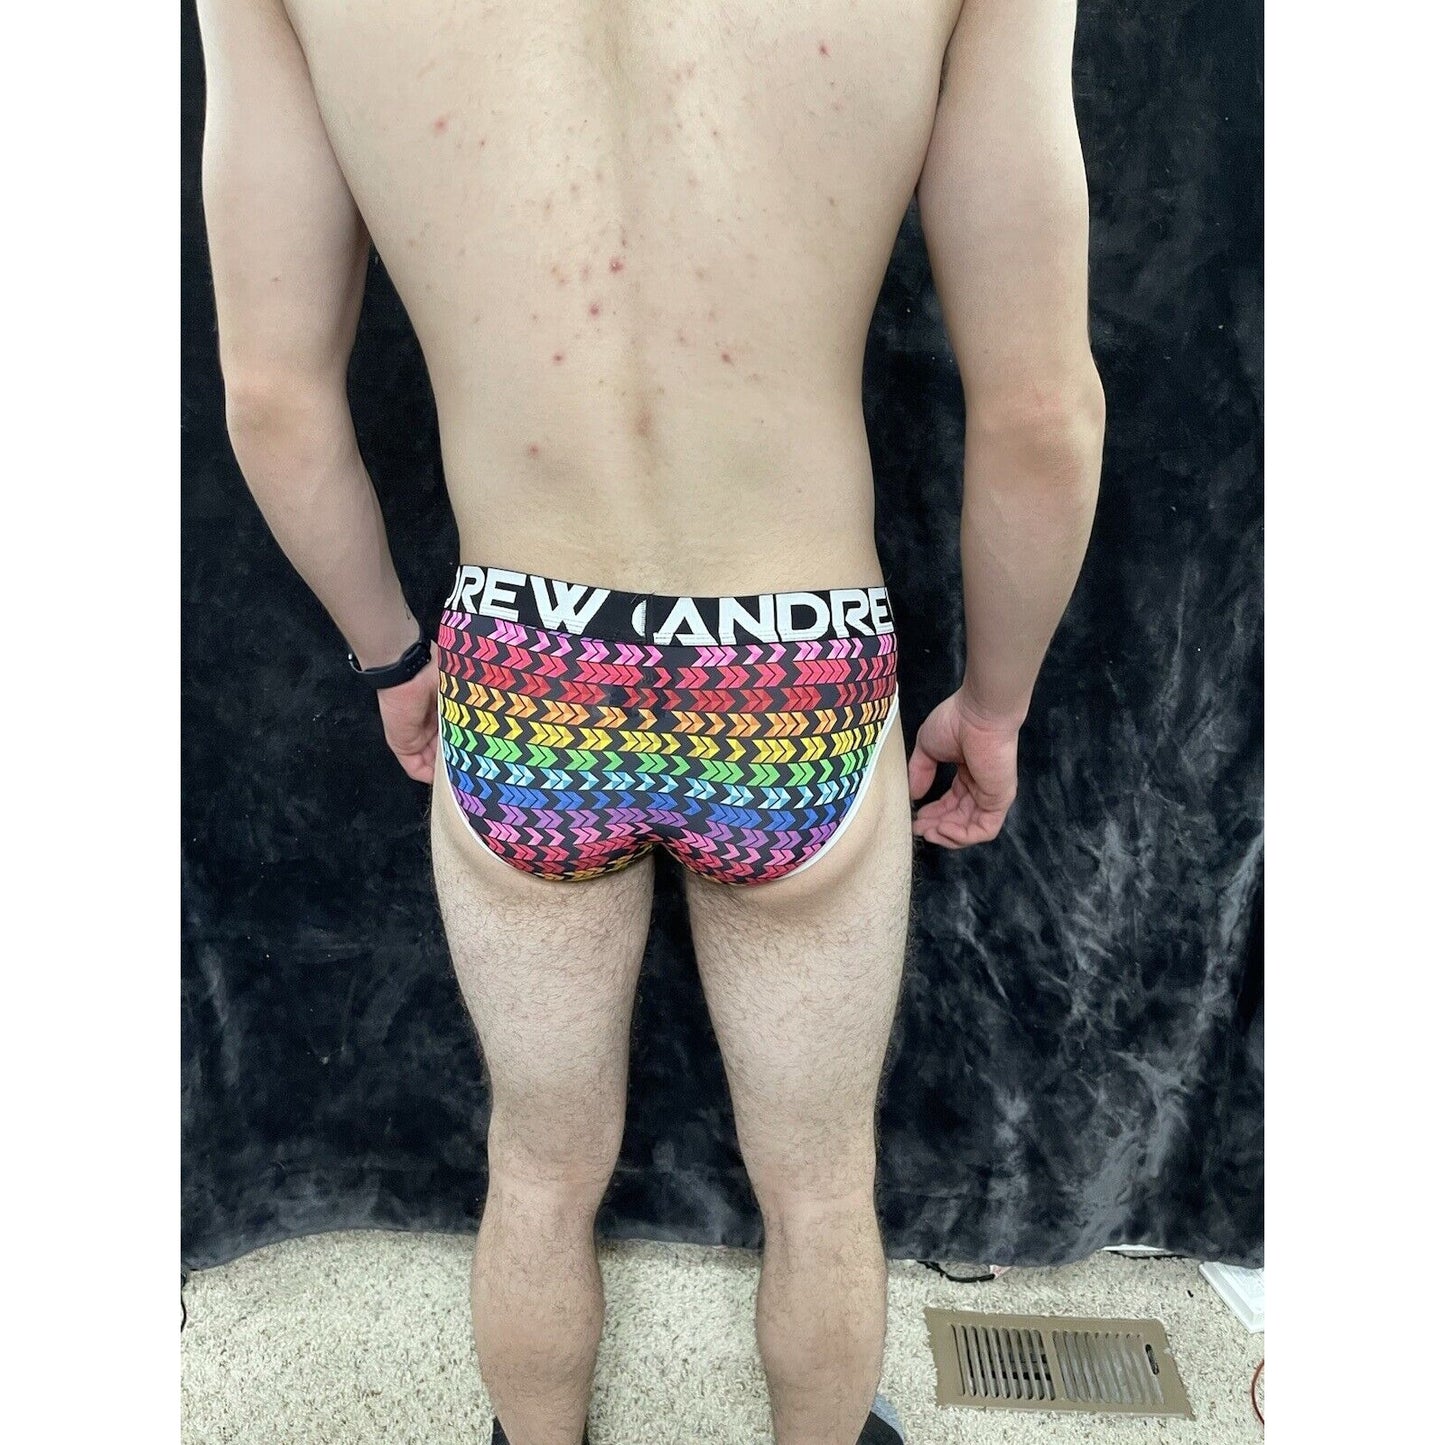 Andrew Christian Pride Arrows Brief w/ Almost Naked Mens Medium